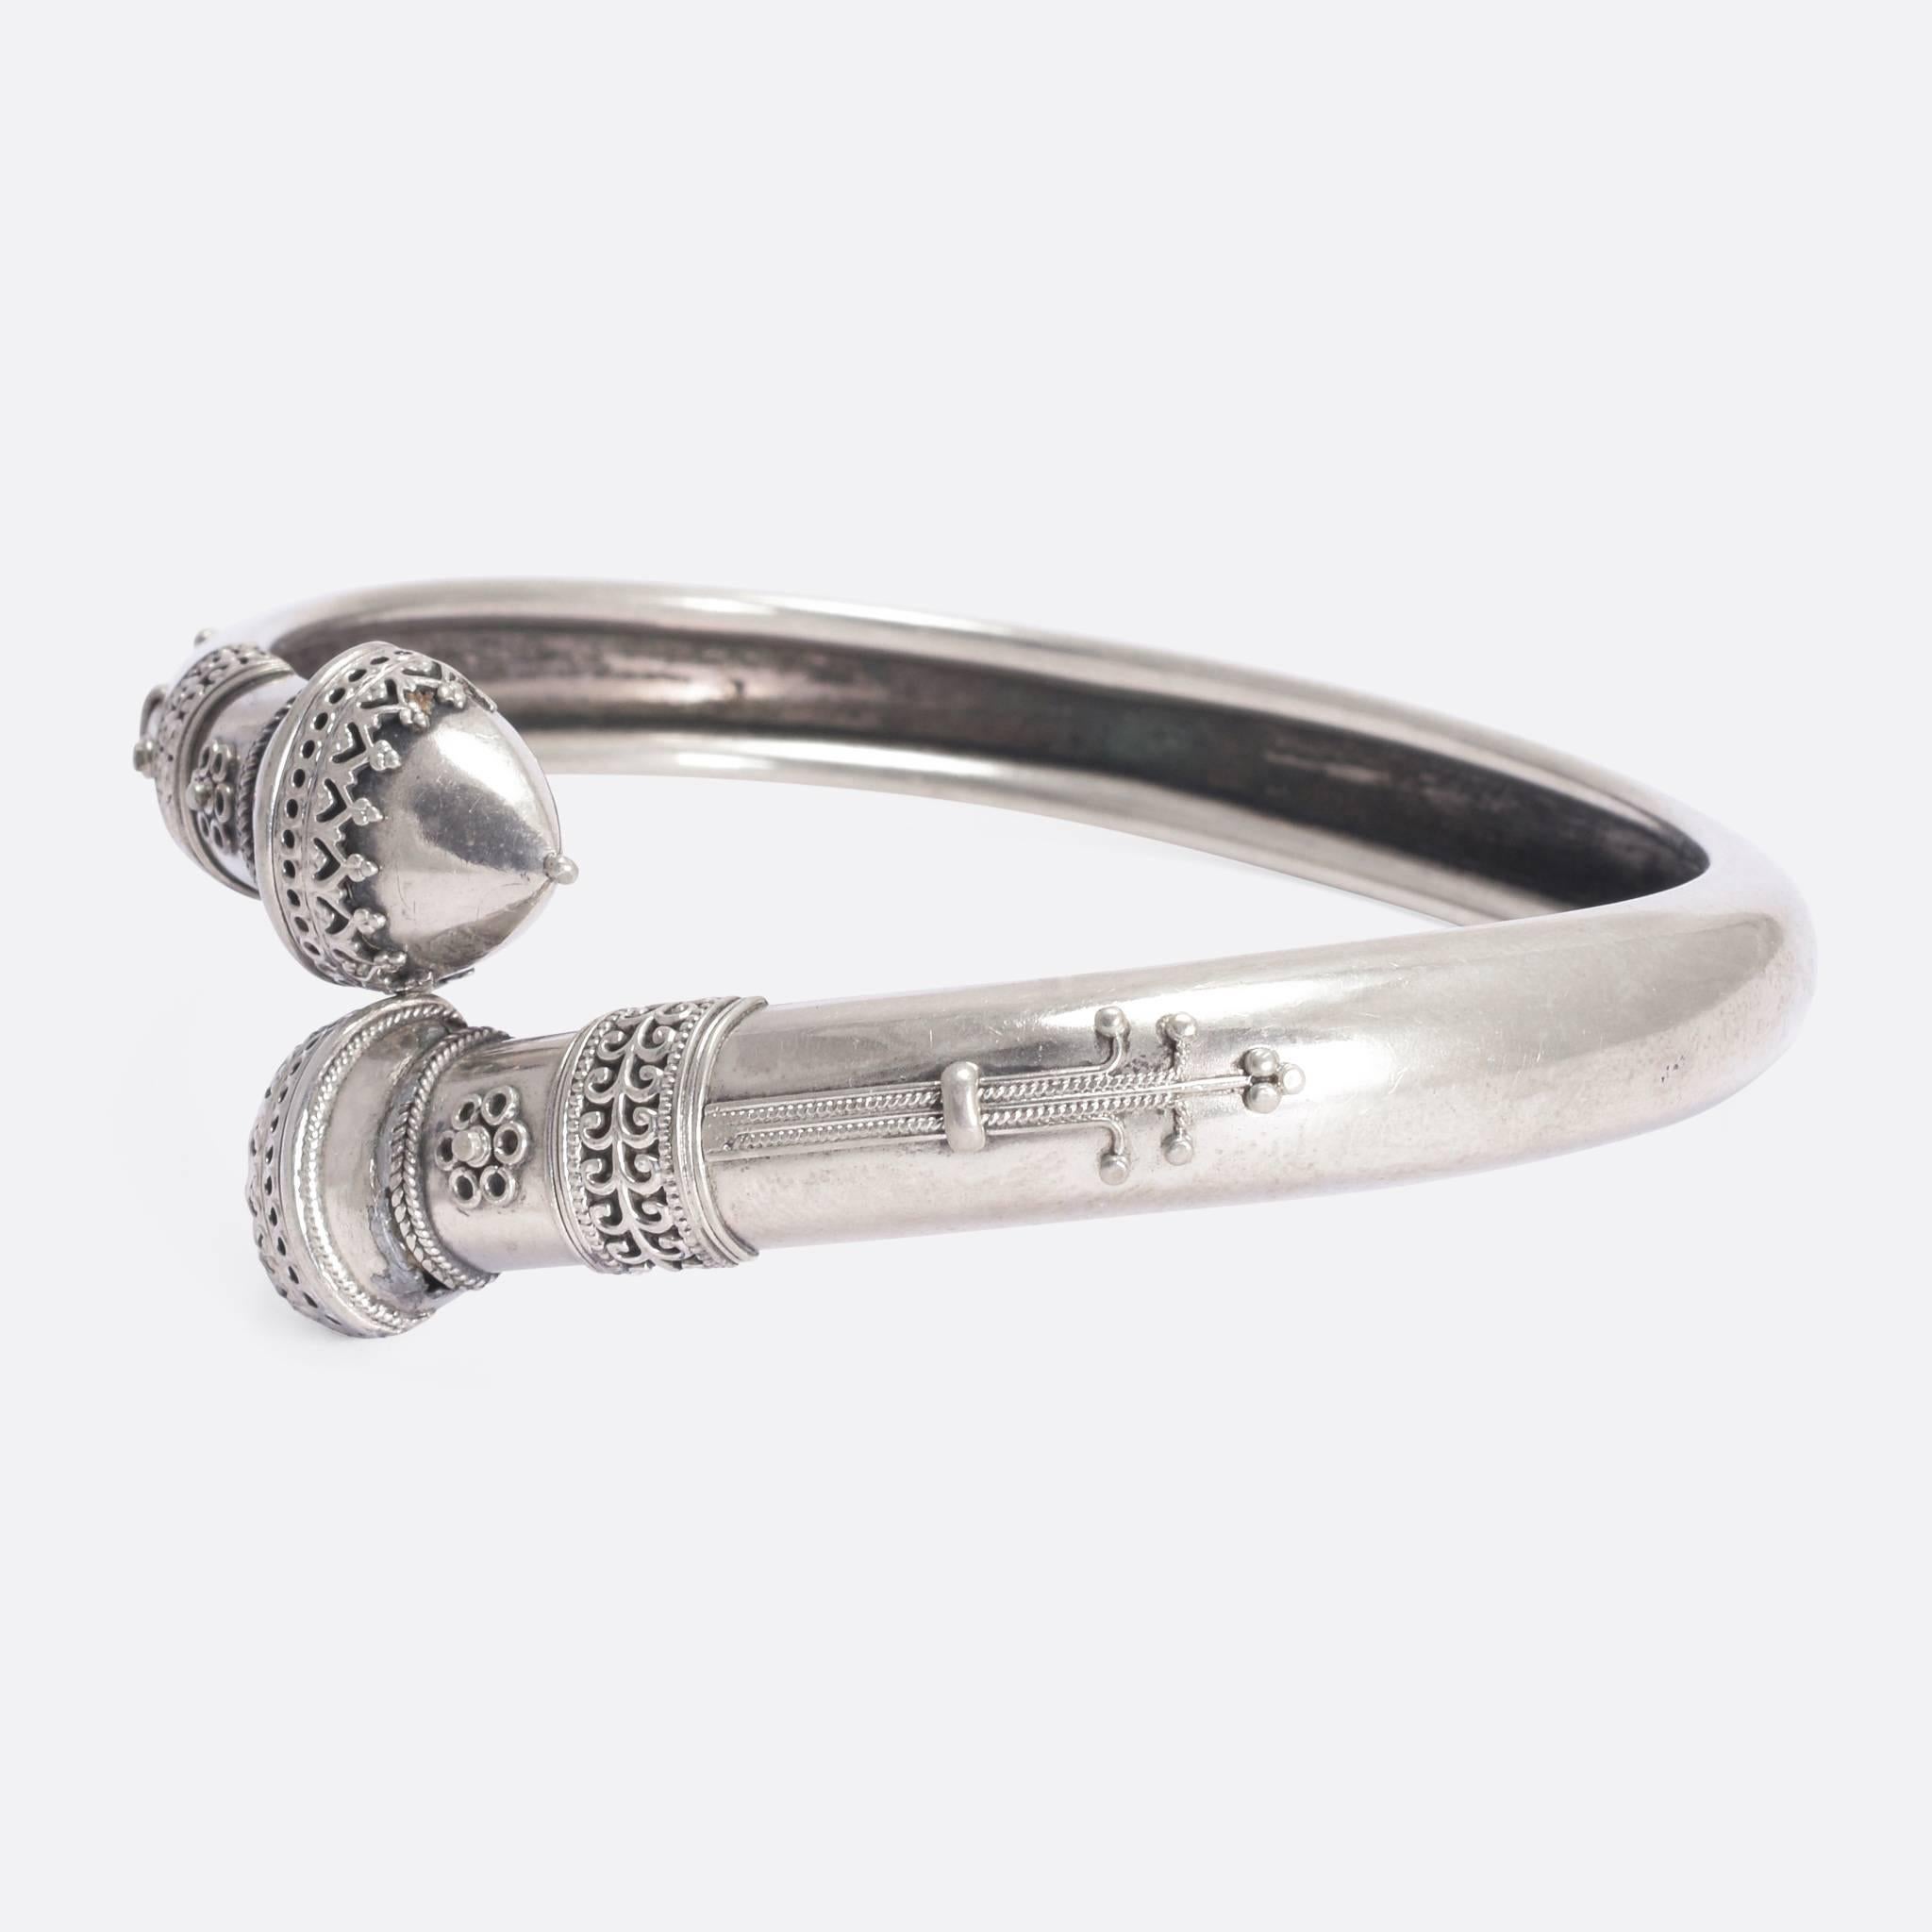 An unusual, and exceptionally lovely antique bangle in the Etruscan Revival style - dating to c.1880. It's crafted in solid silver, and features two acorns, beautifully adorned with intricate applied silverwork.
The Etruscan Revivalist movement